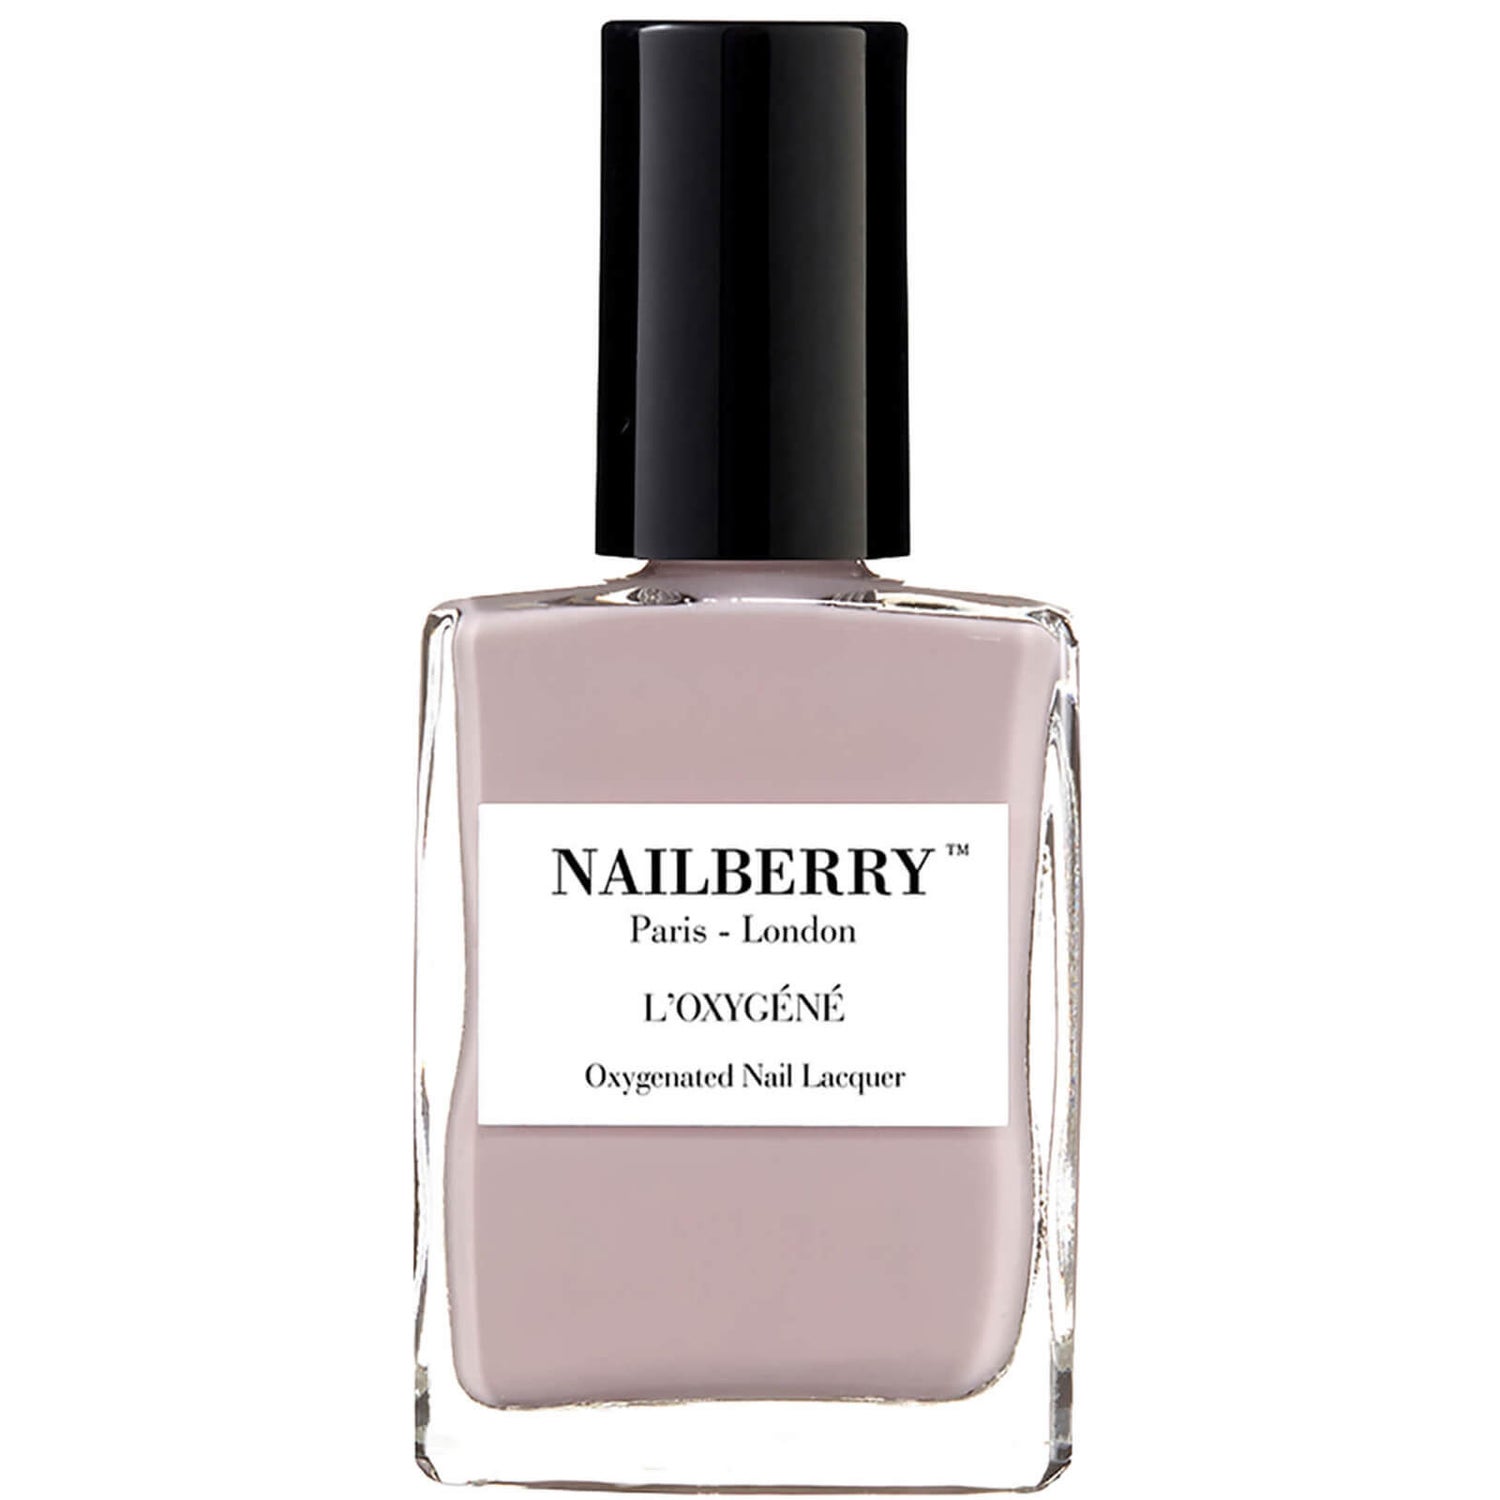 Nailberry L'Oxygene Nail Lacquer Mystere